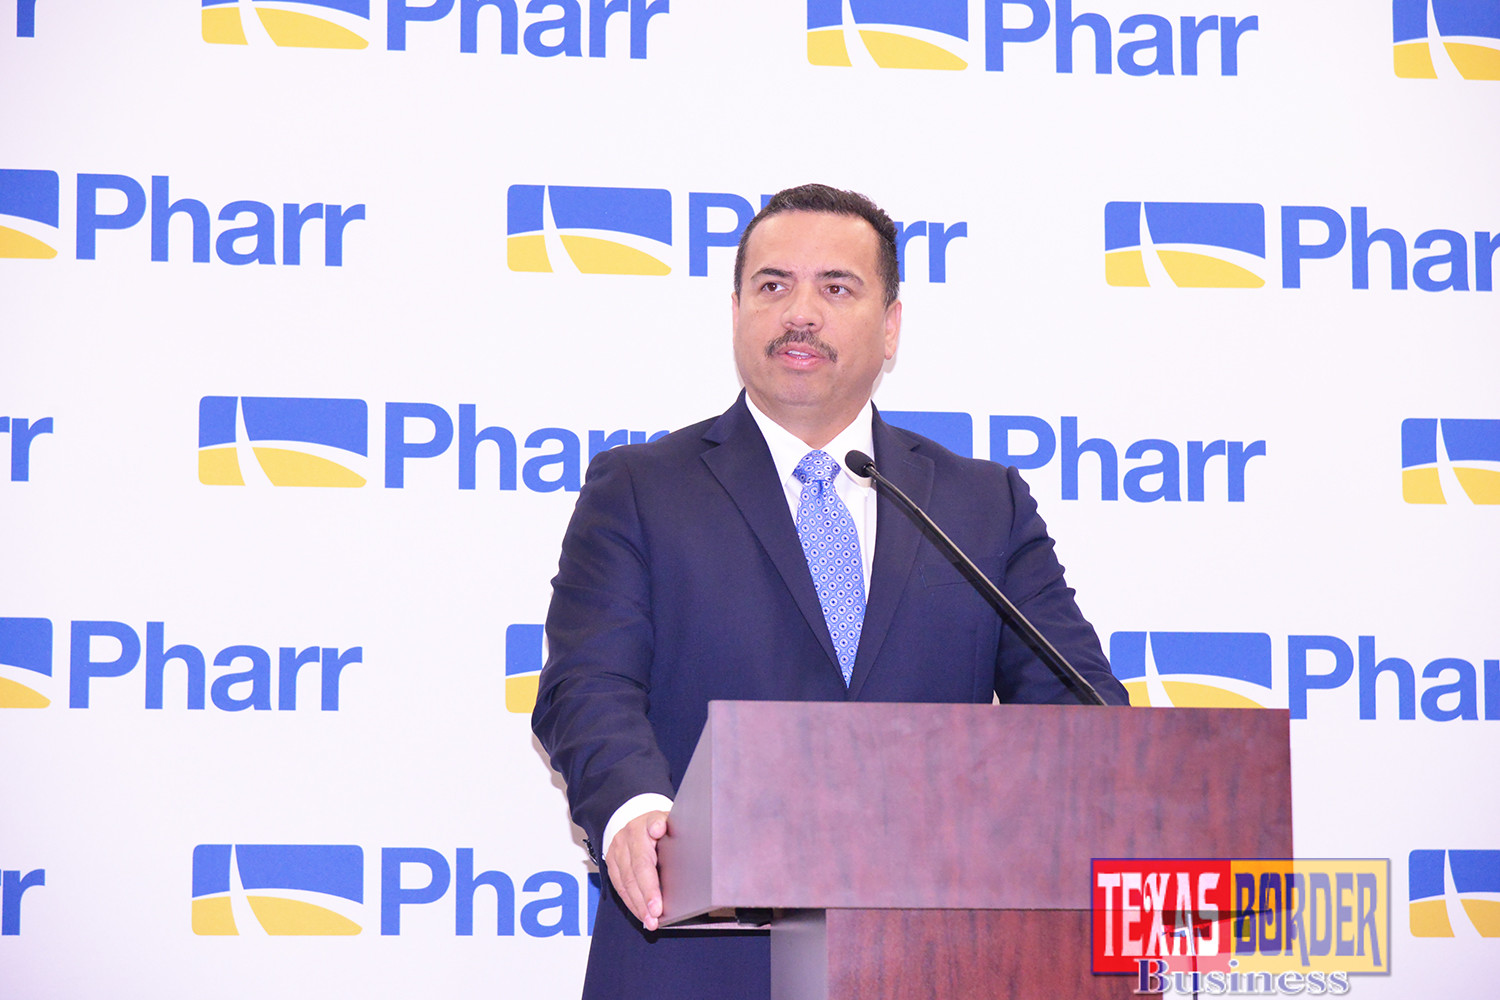 Pictured above is Mayor Ambrosio Hernandez and it was said that his position as Mayor and PEDC Chairman is to be transparent with the public. Since 2011, the City of Pharr began working on two major City projects, the Jackson Retail Project and the Pharr Produce Park. Since the projects began in 2011, the losses on the value of the land have been nearly $14 million, and $6.5 million is the loss for the previous fiscal year – $3 million loss on the Produce Park Project and nearly $11 million on the Jackson Retail project.  The losses are the result of the cost of the land that was purchased along with infrastructure costs compared to the land’s market value. Photo By Roberto Hugo Gonzalez